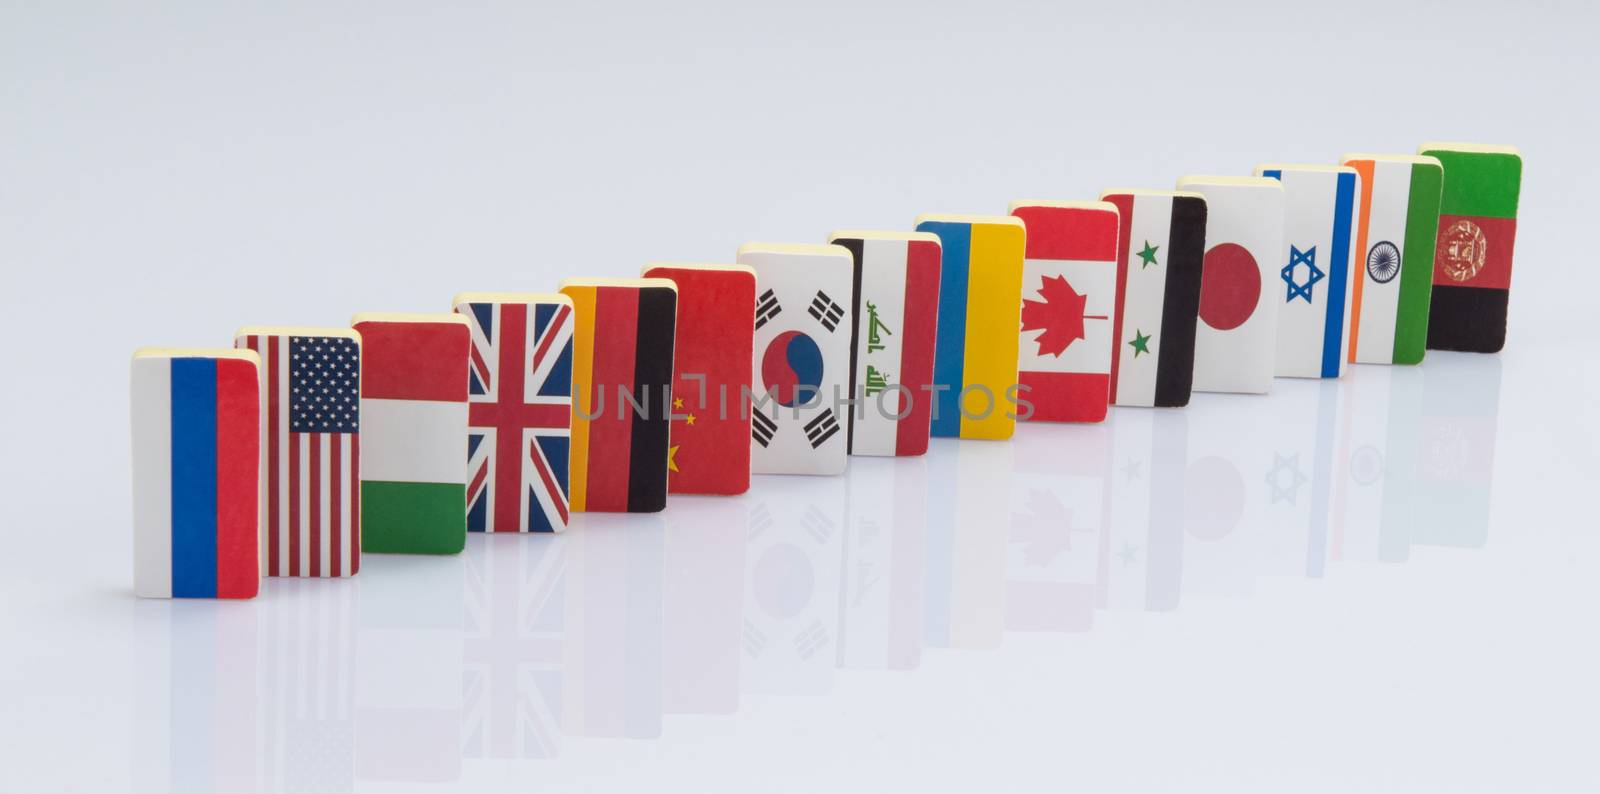 The domino effect with tiles of flags of different countries of the world. conceptual photo, political games. Studio shooting